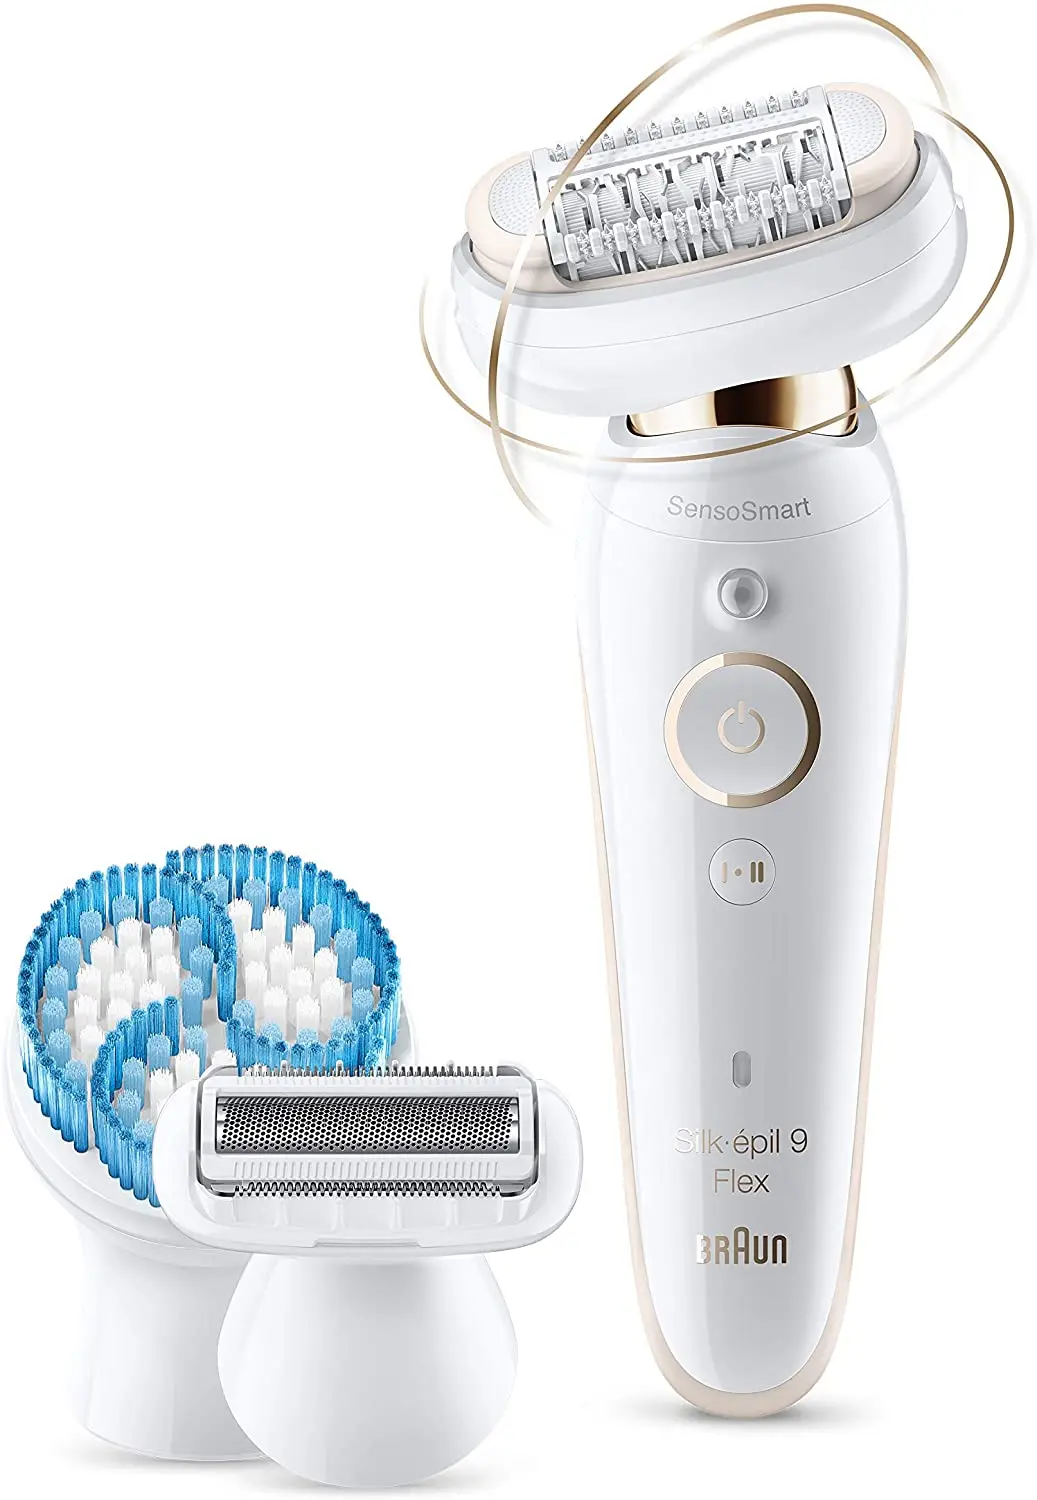 

Braun Silk-epil 9 Flex 9010, Wireless, Wet-Dry, 3in 1 Combination of Epilator/Hair Removal in the Whole body use, Micro Grip